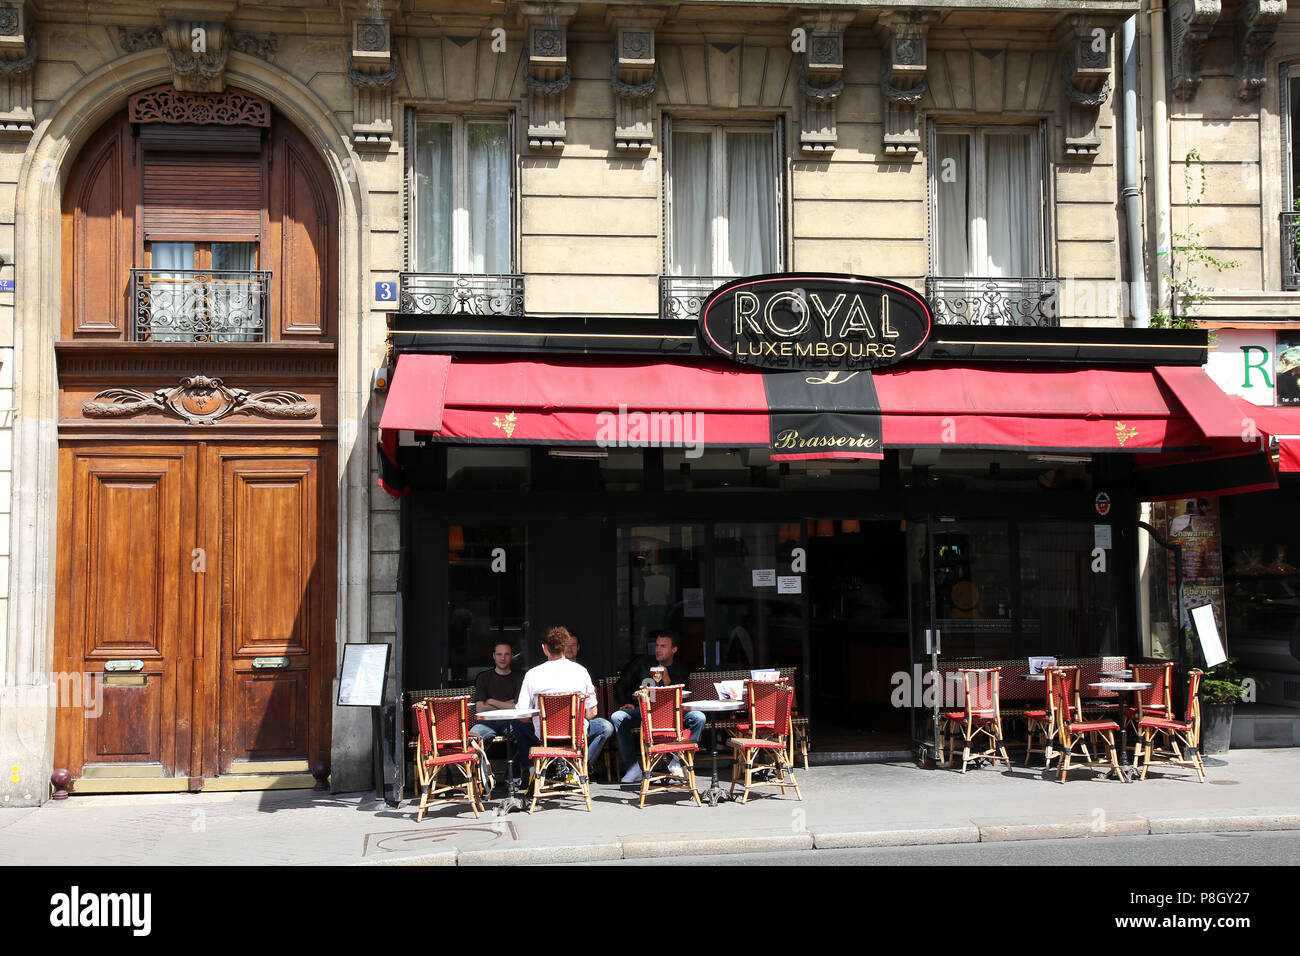 PARIS - JULY 24: Royal Luxembourg cafe on July 24, 2011 in Paris, France. Royal Luxembourg cafe is a typical establishment for Paris, one of largest m Stock Photo